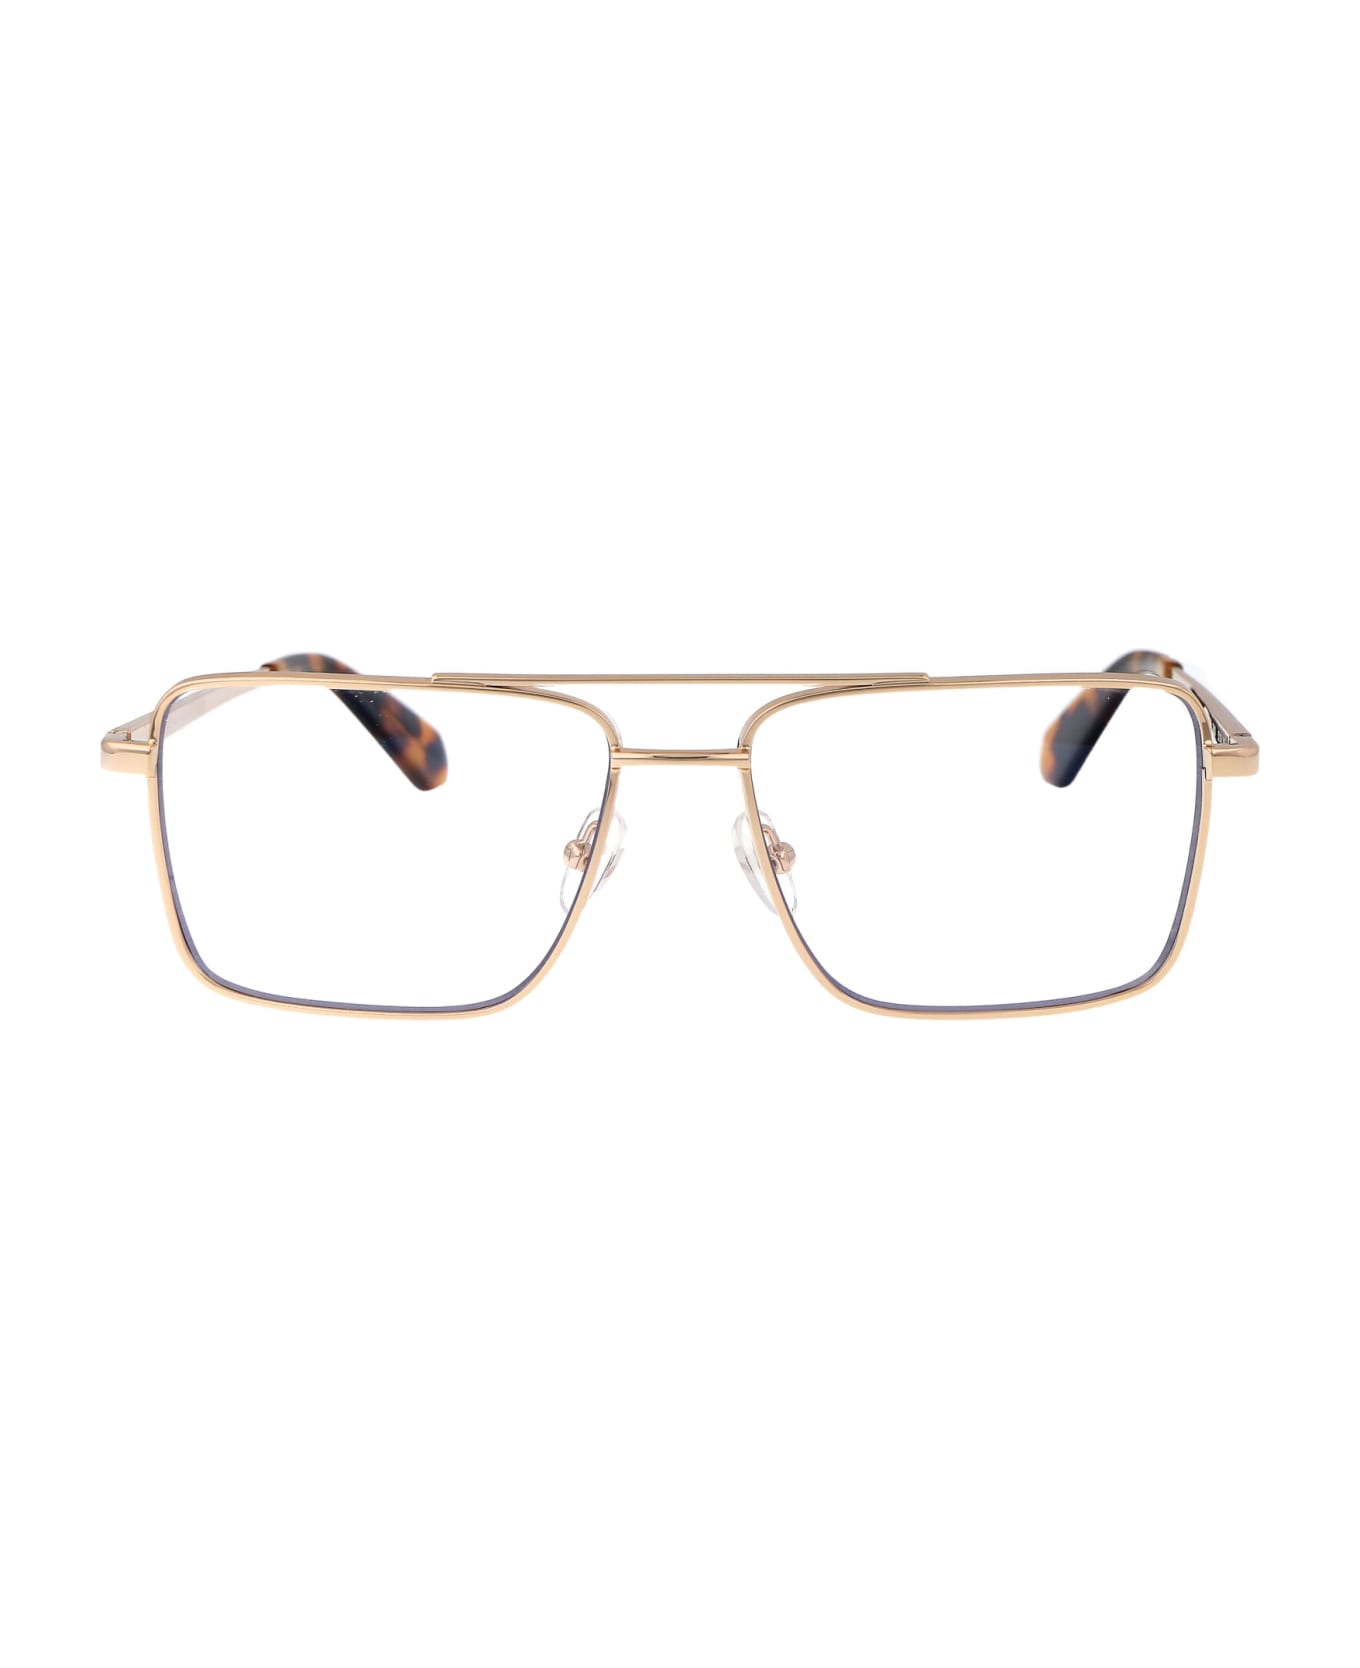 Off-White Optical Style 66 Glasses - 7600 GOLD